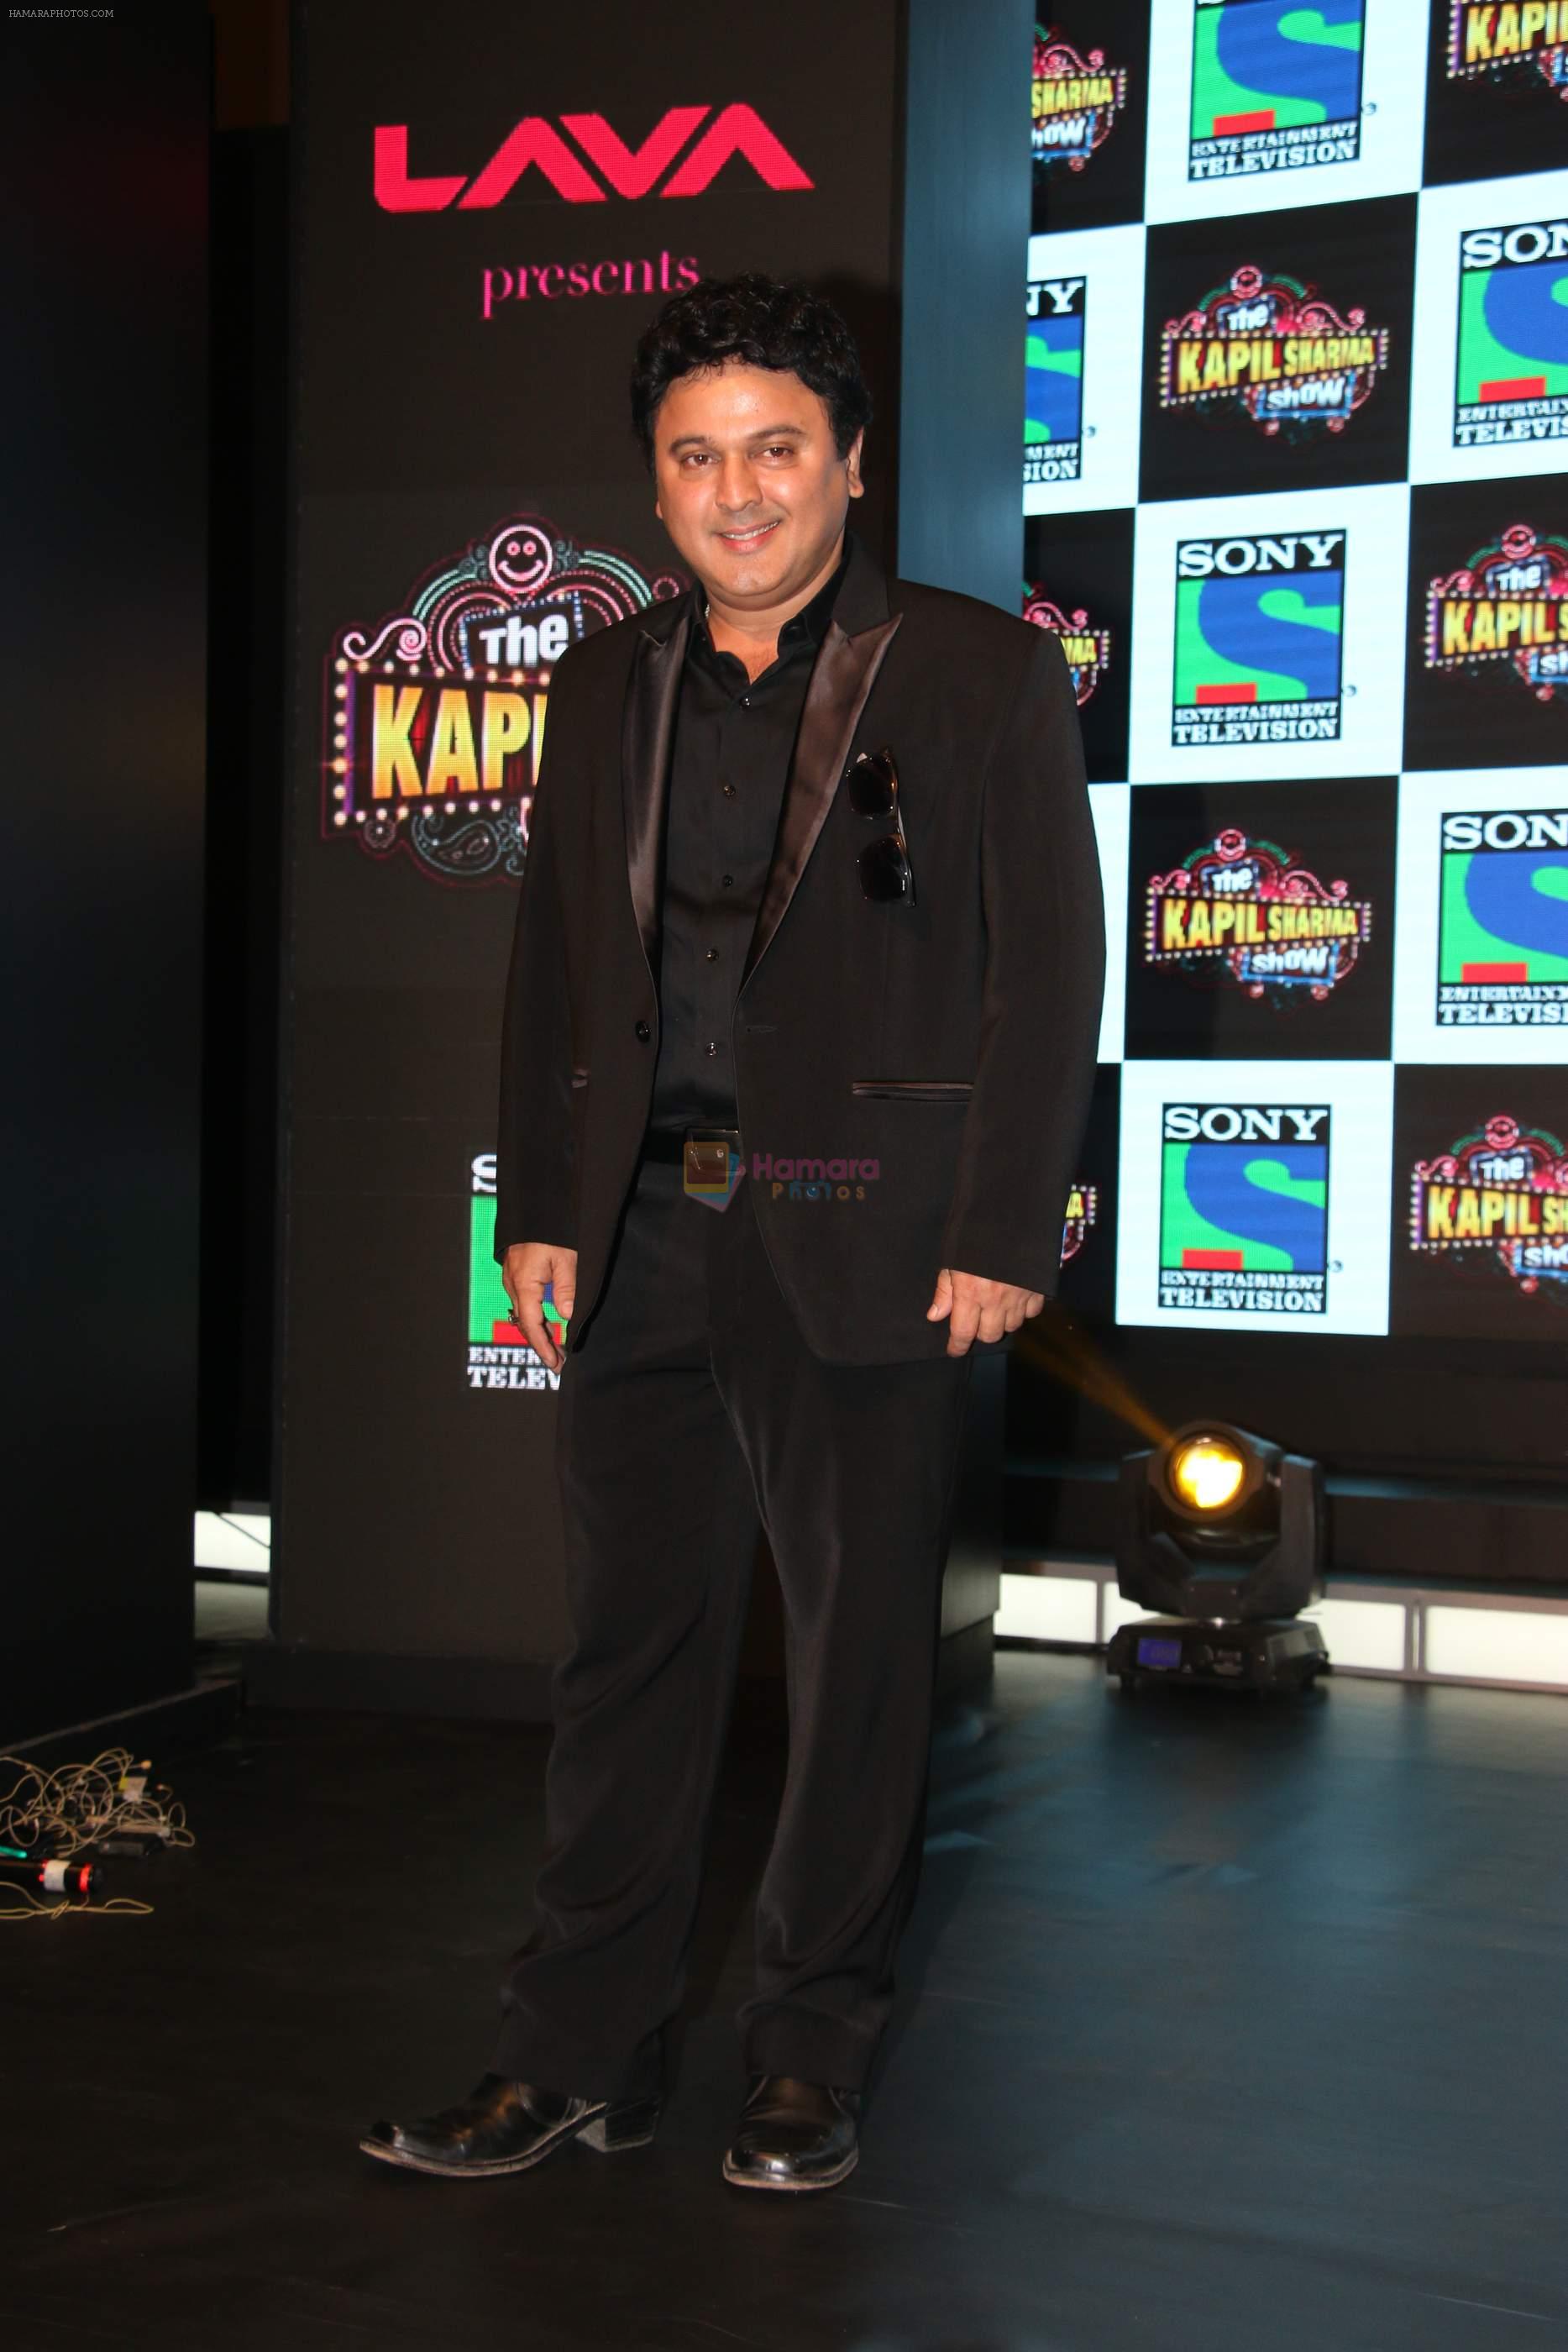 Ali Asgar with Kapil Sharma ties up with Sony with new Show The kapil Sharma Show on 1st March 2016